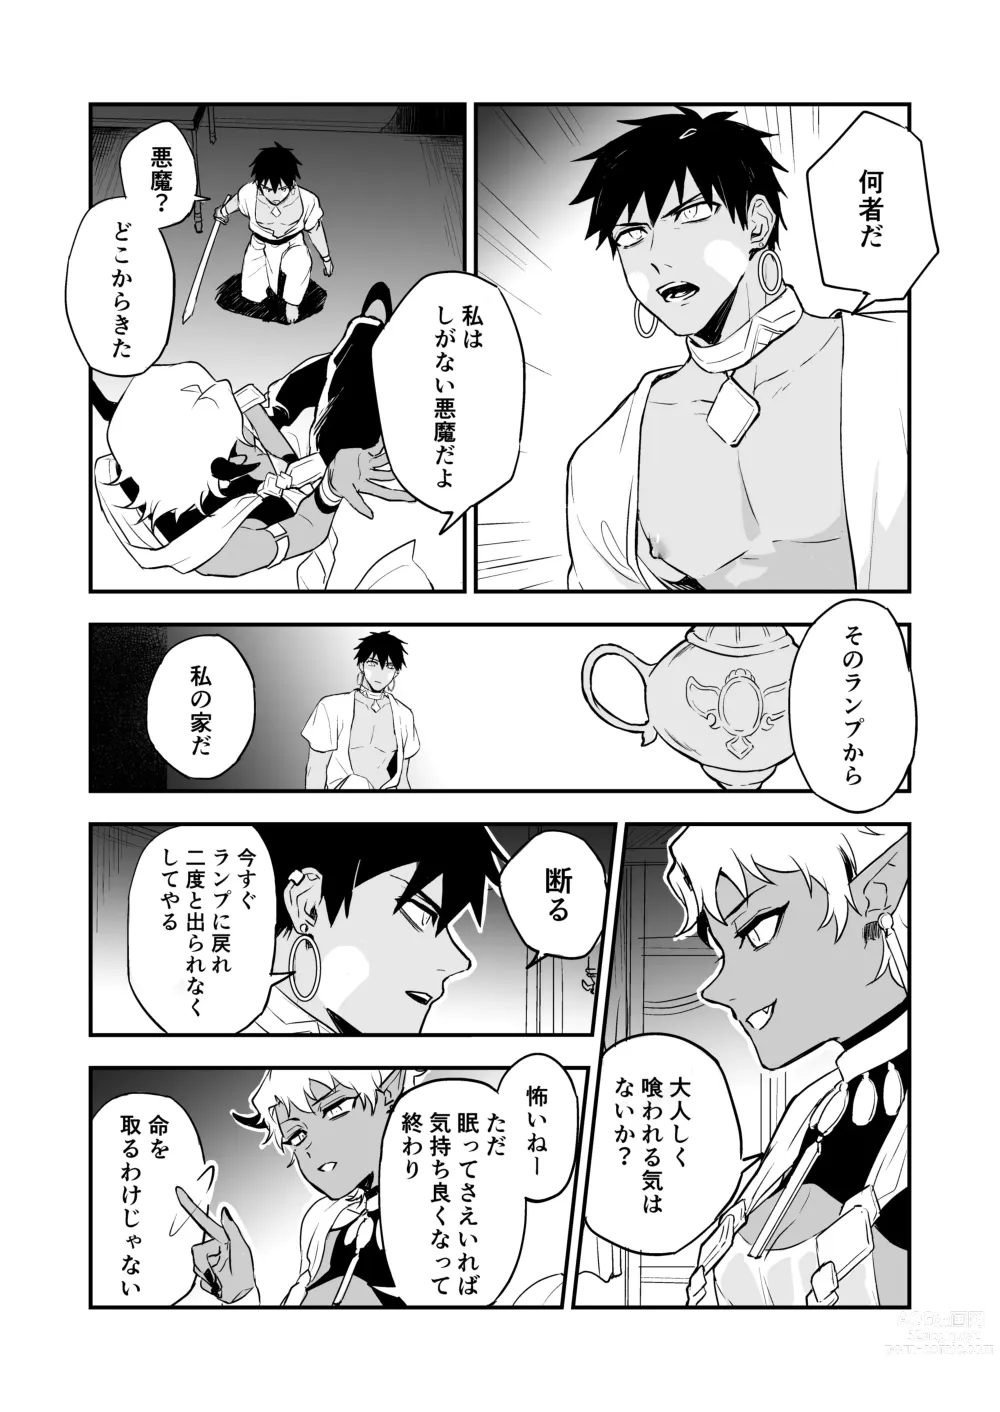 Page 21 of doujinshi INCUBUS LAMP